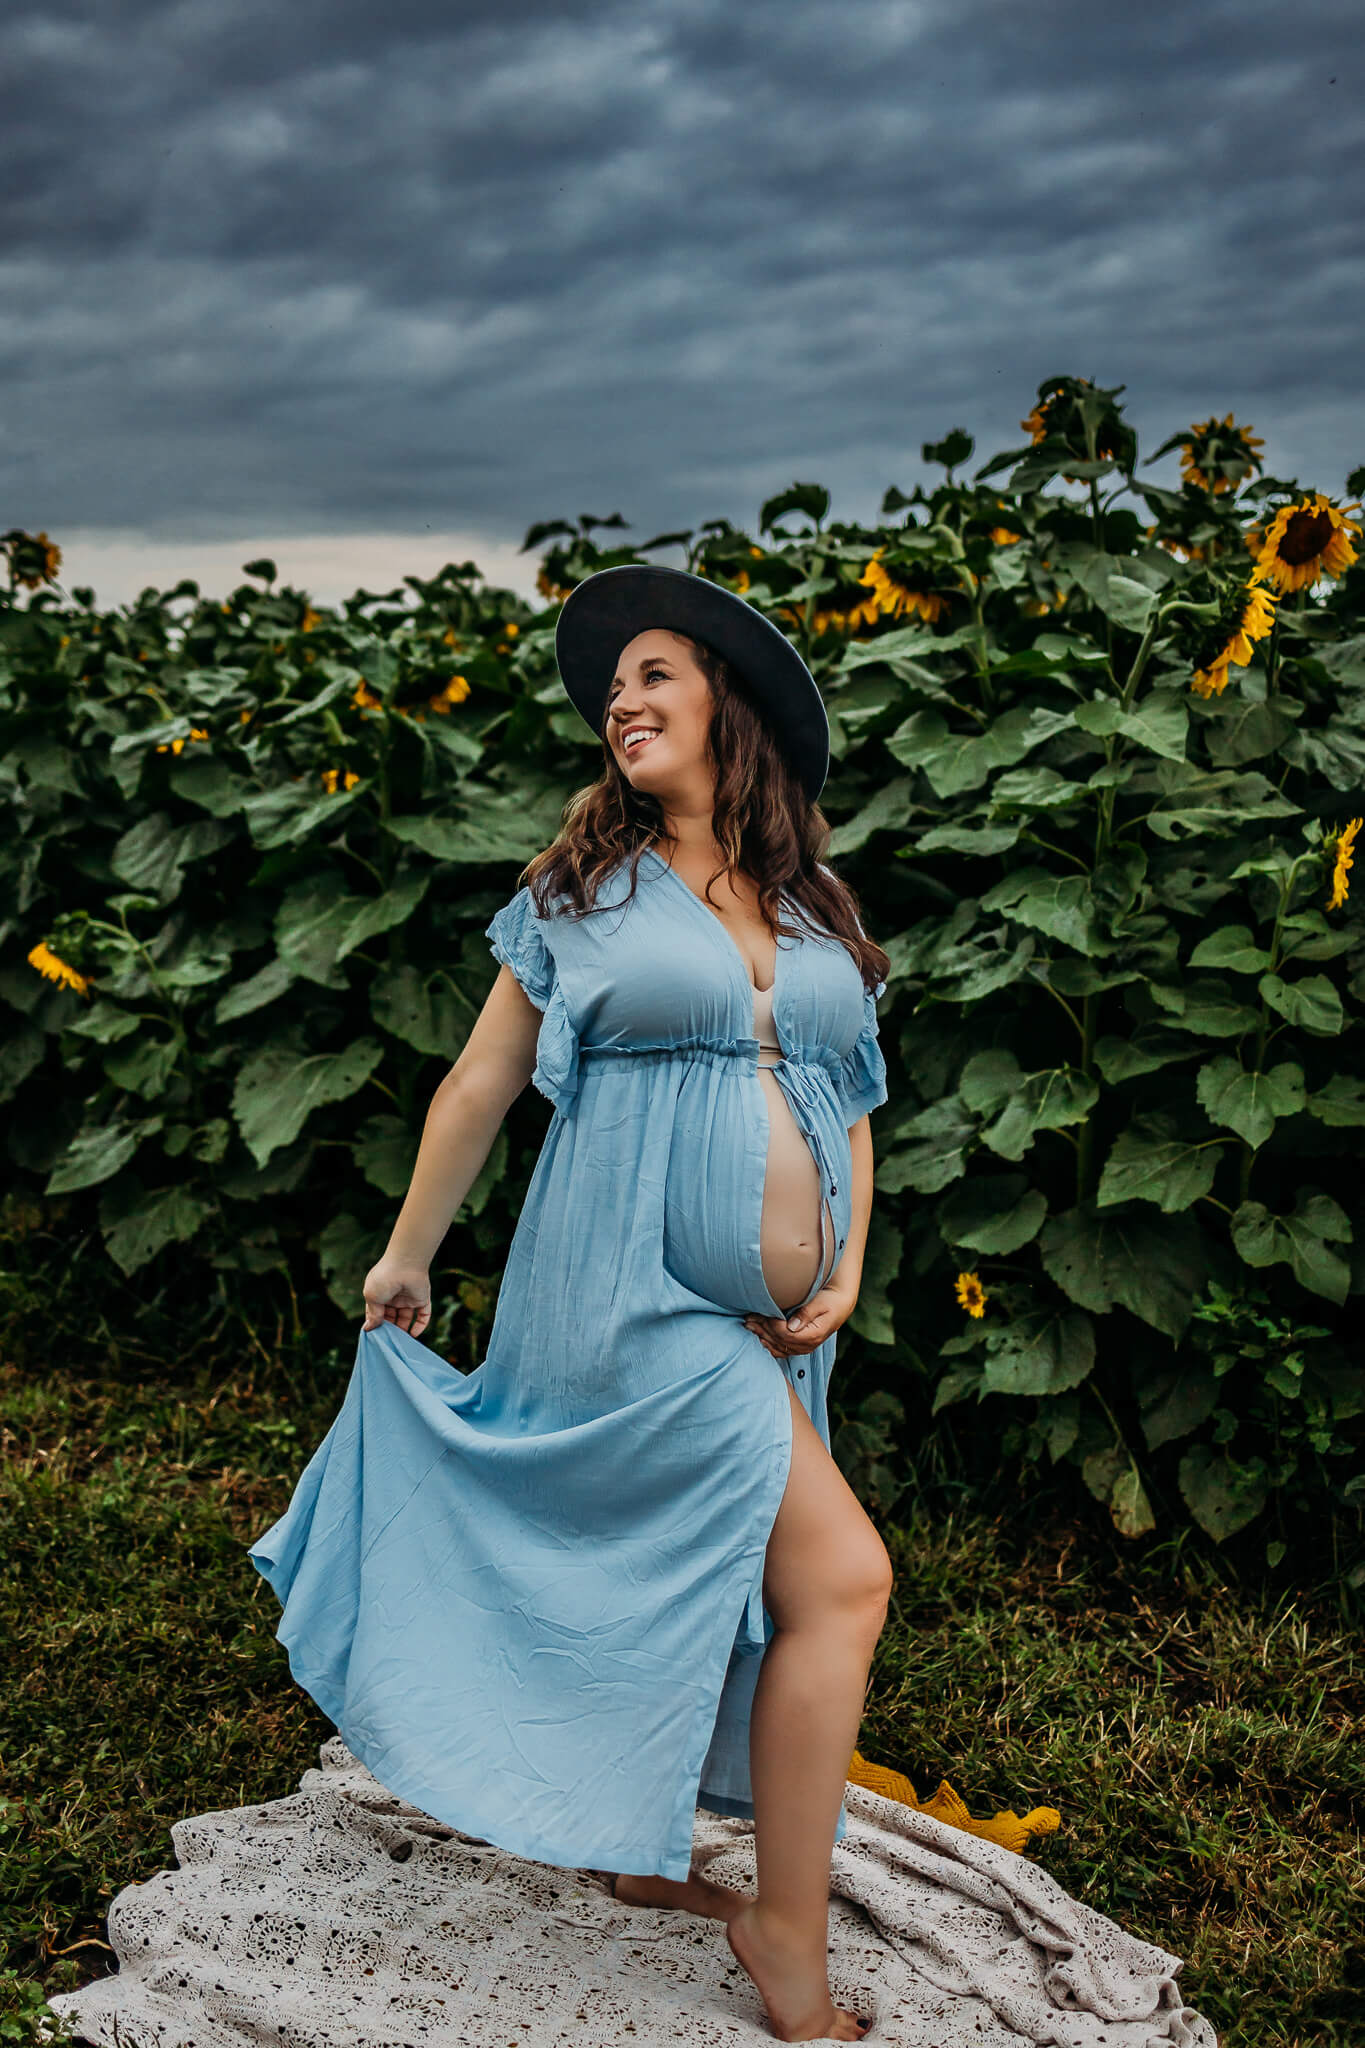 mom to be holding her bump and blue dress while wearing a hat in a sunflower field doula eau claire wi